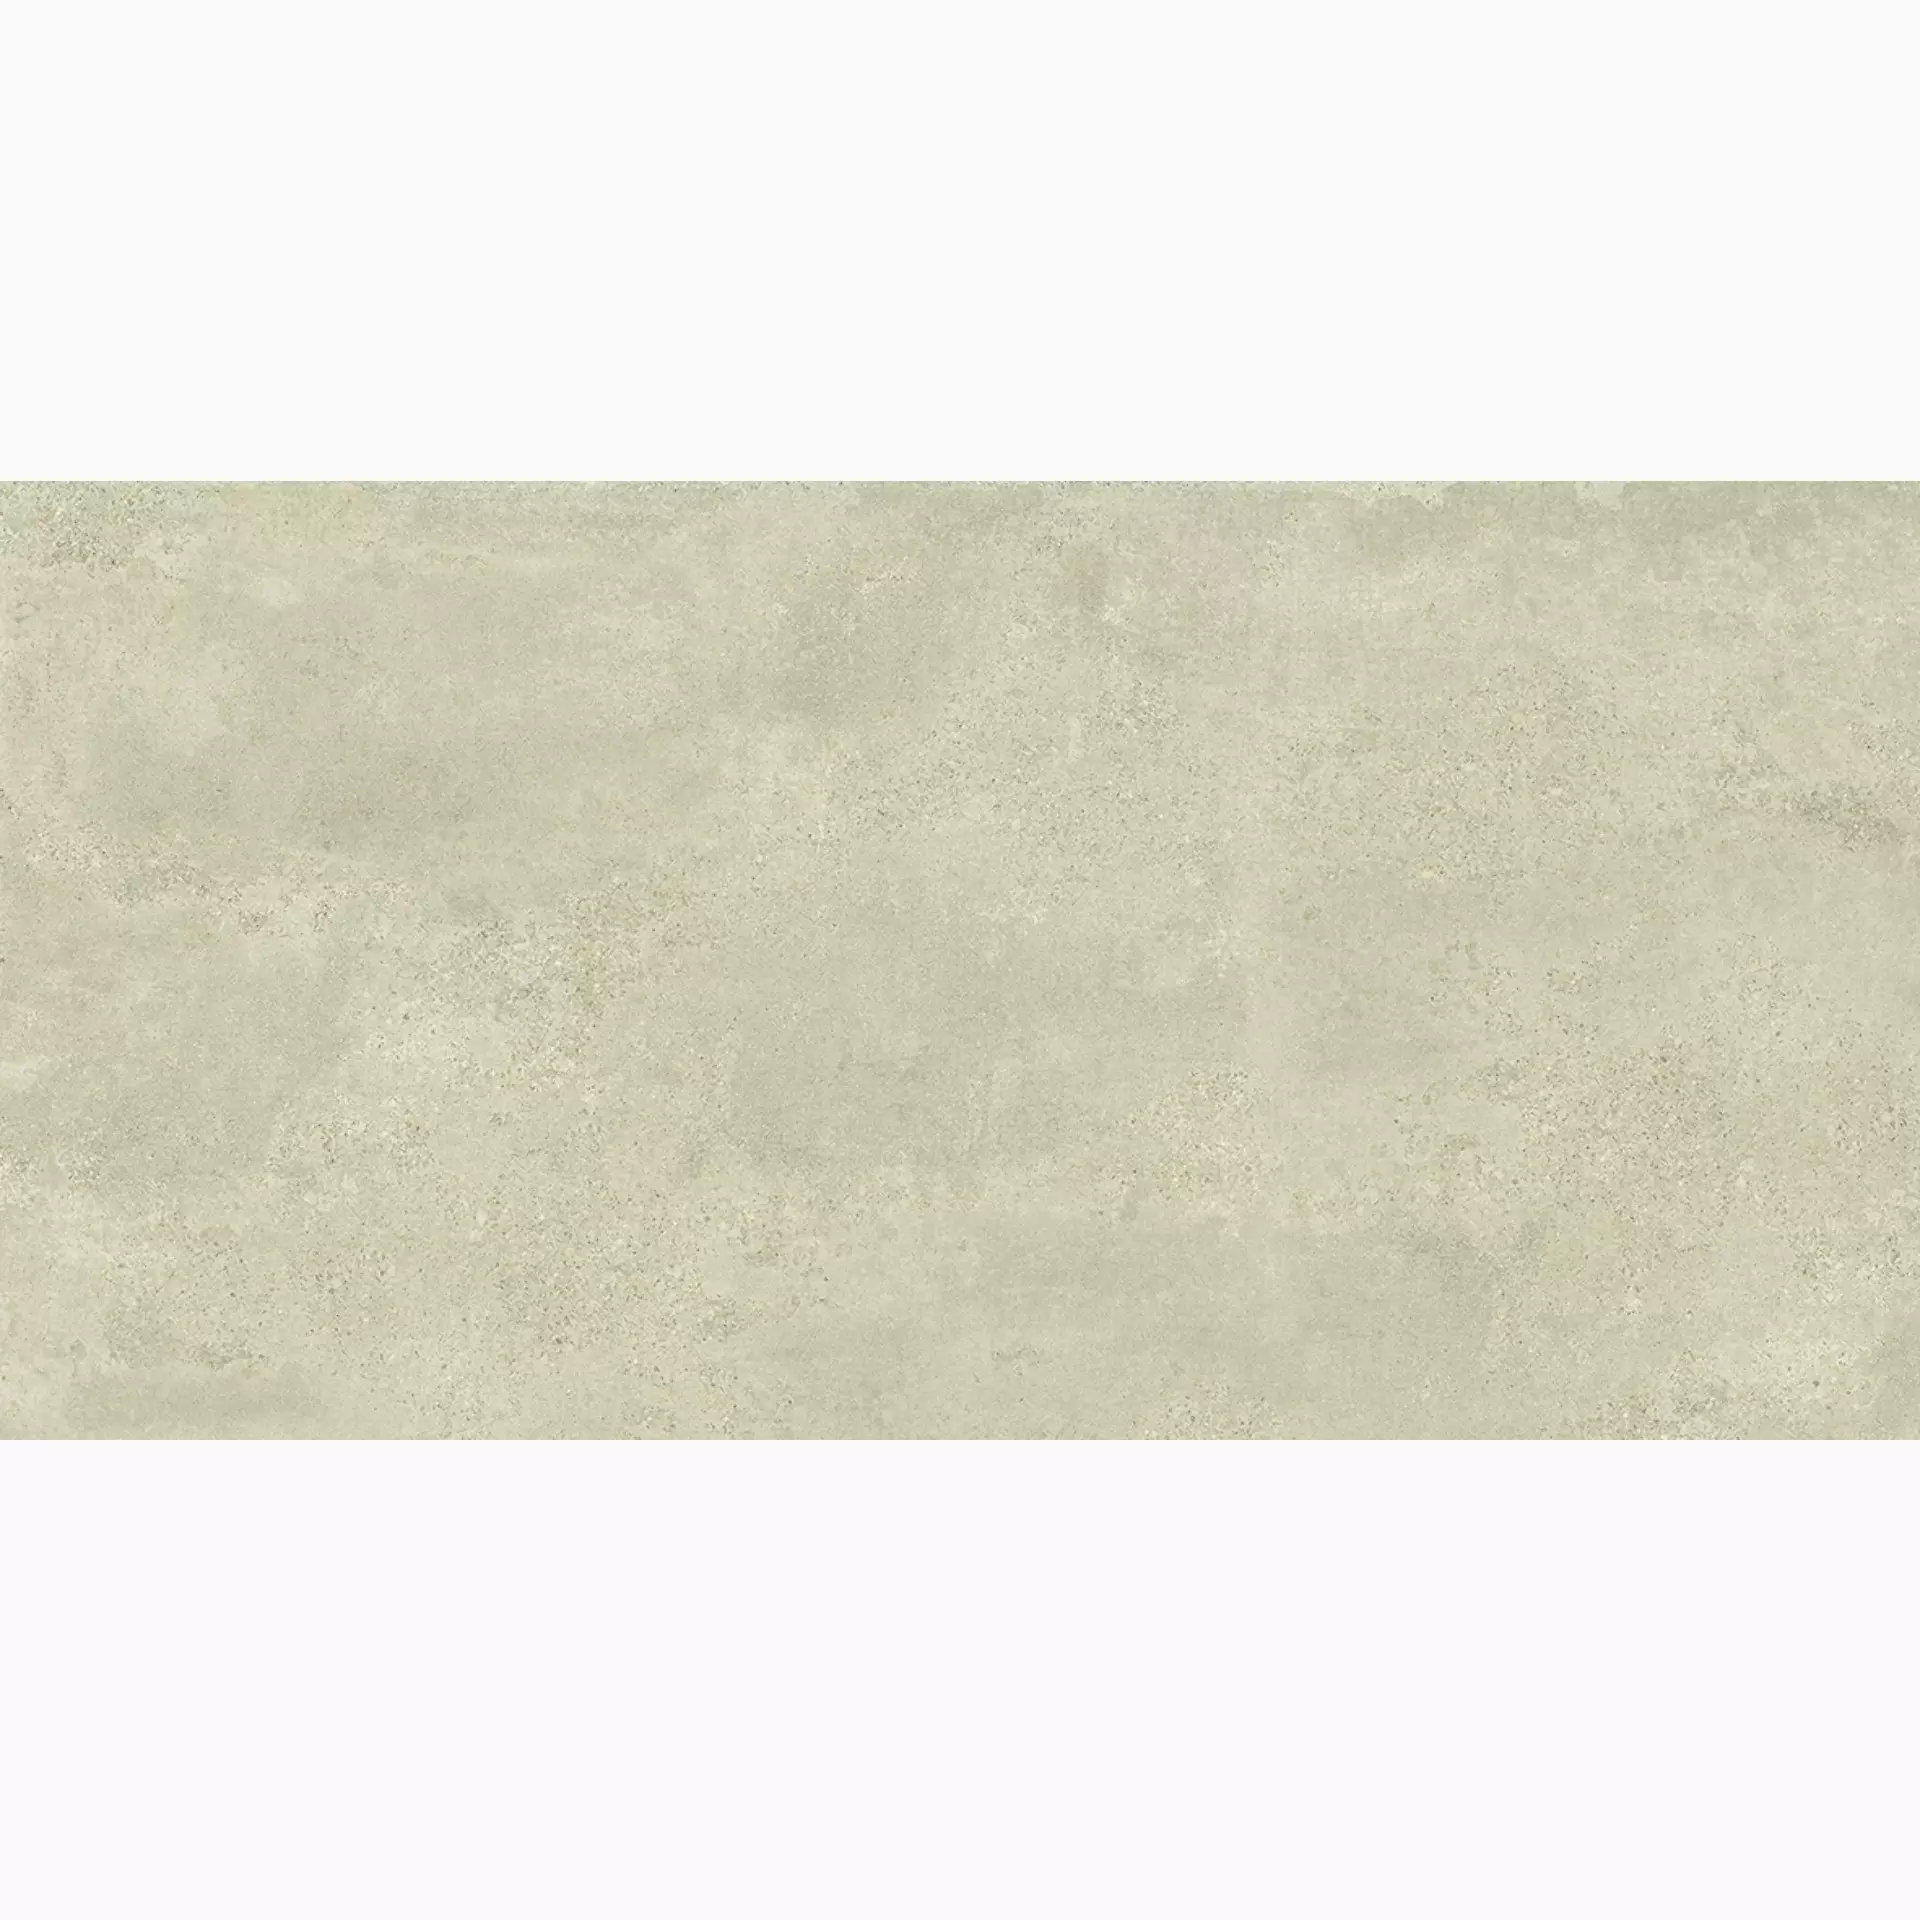 Provenza Re-Play Concrete Sand Naturale Recupero EKFW 80x160cm rectified 9,5mm